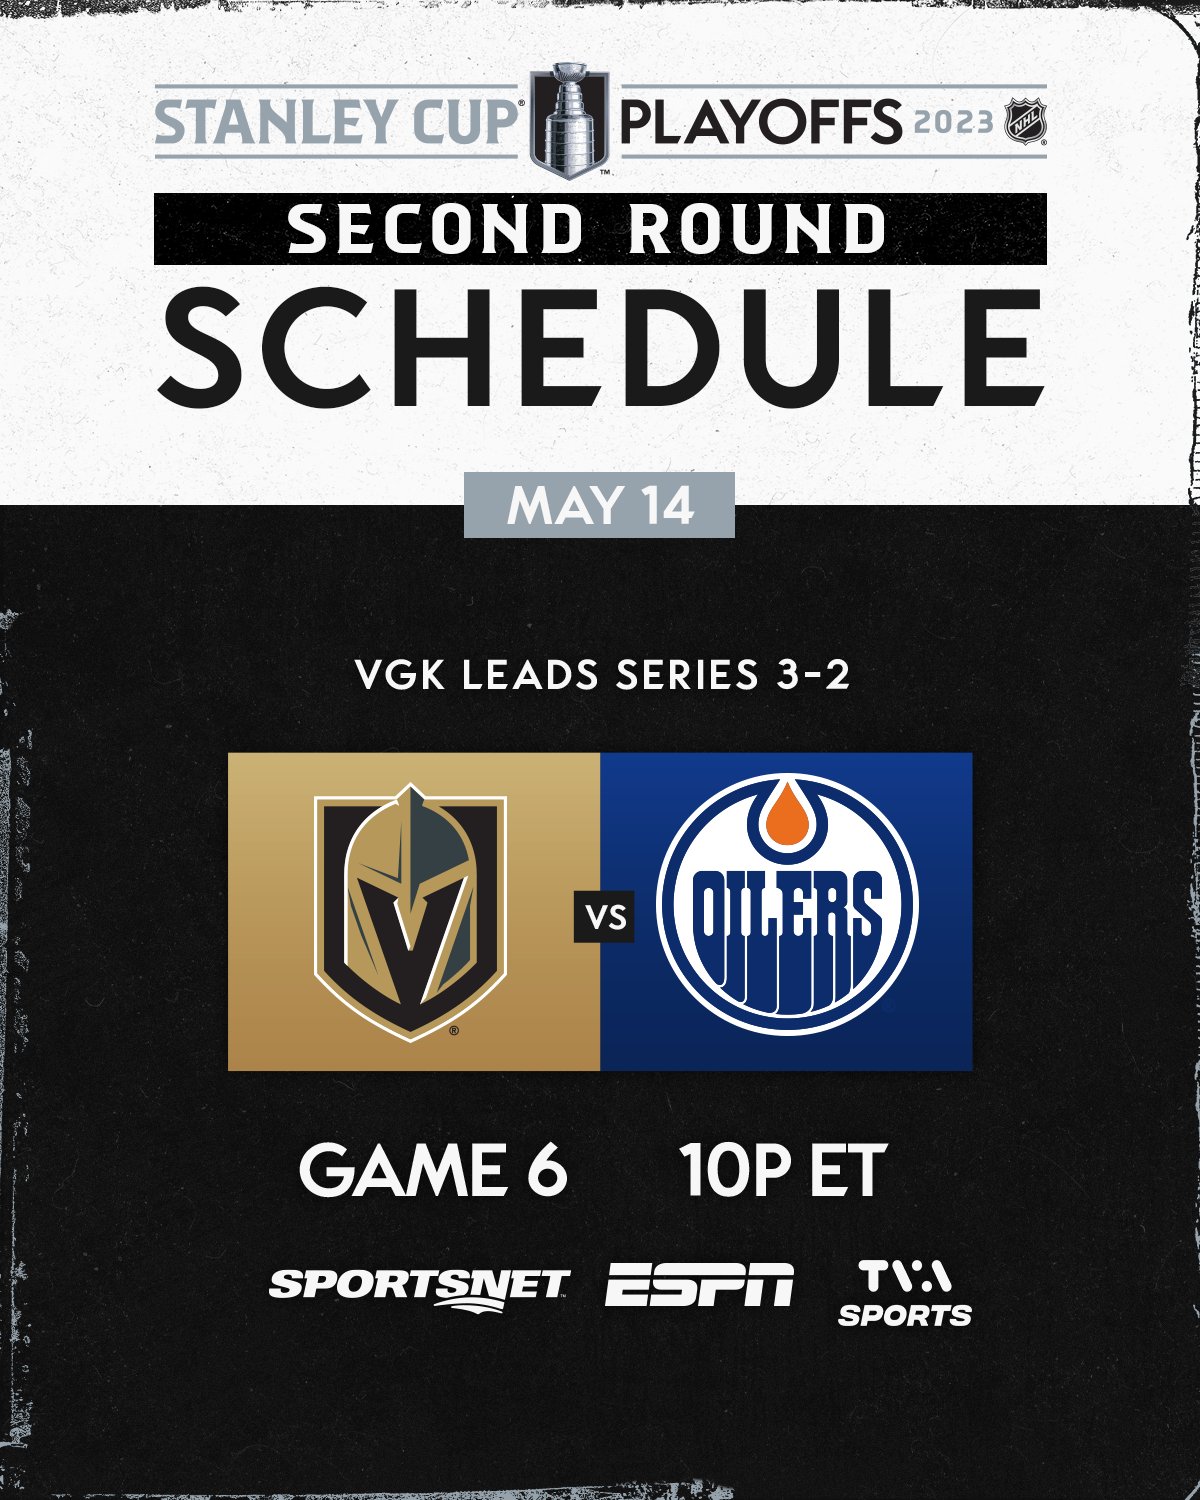 NHL on X: The countdown to the #StanleyCup Playoffs is on! Which